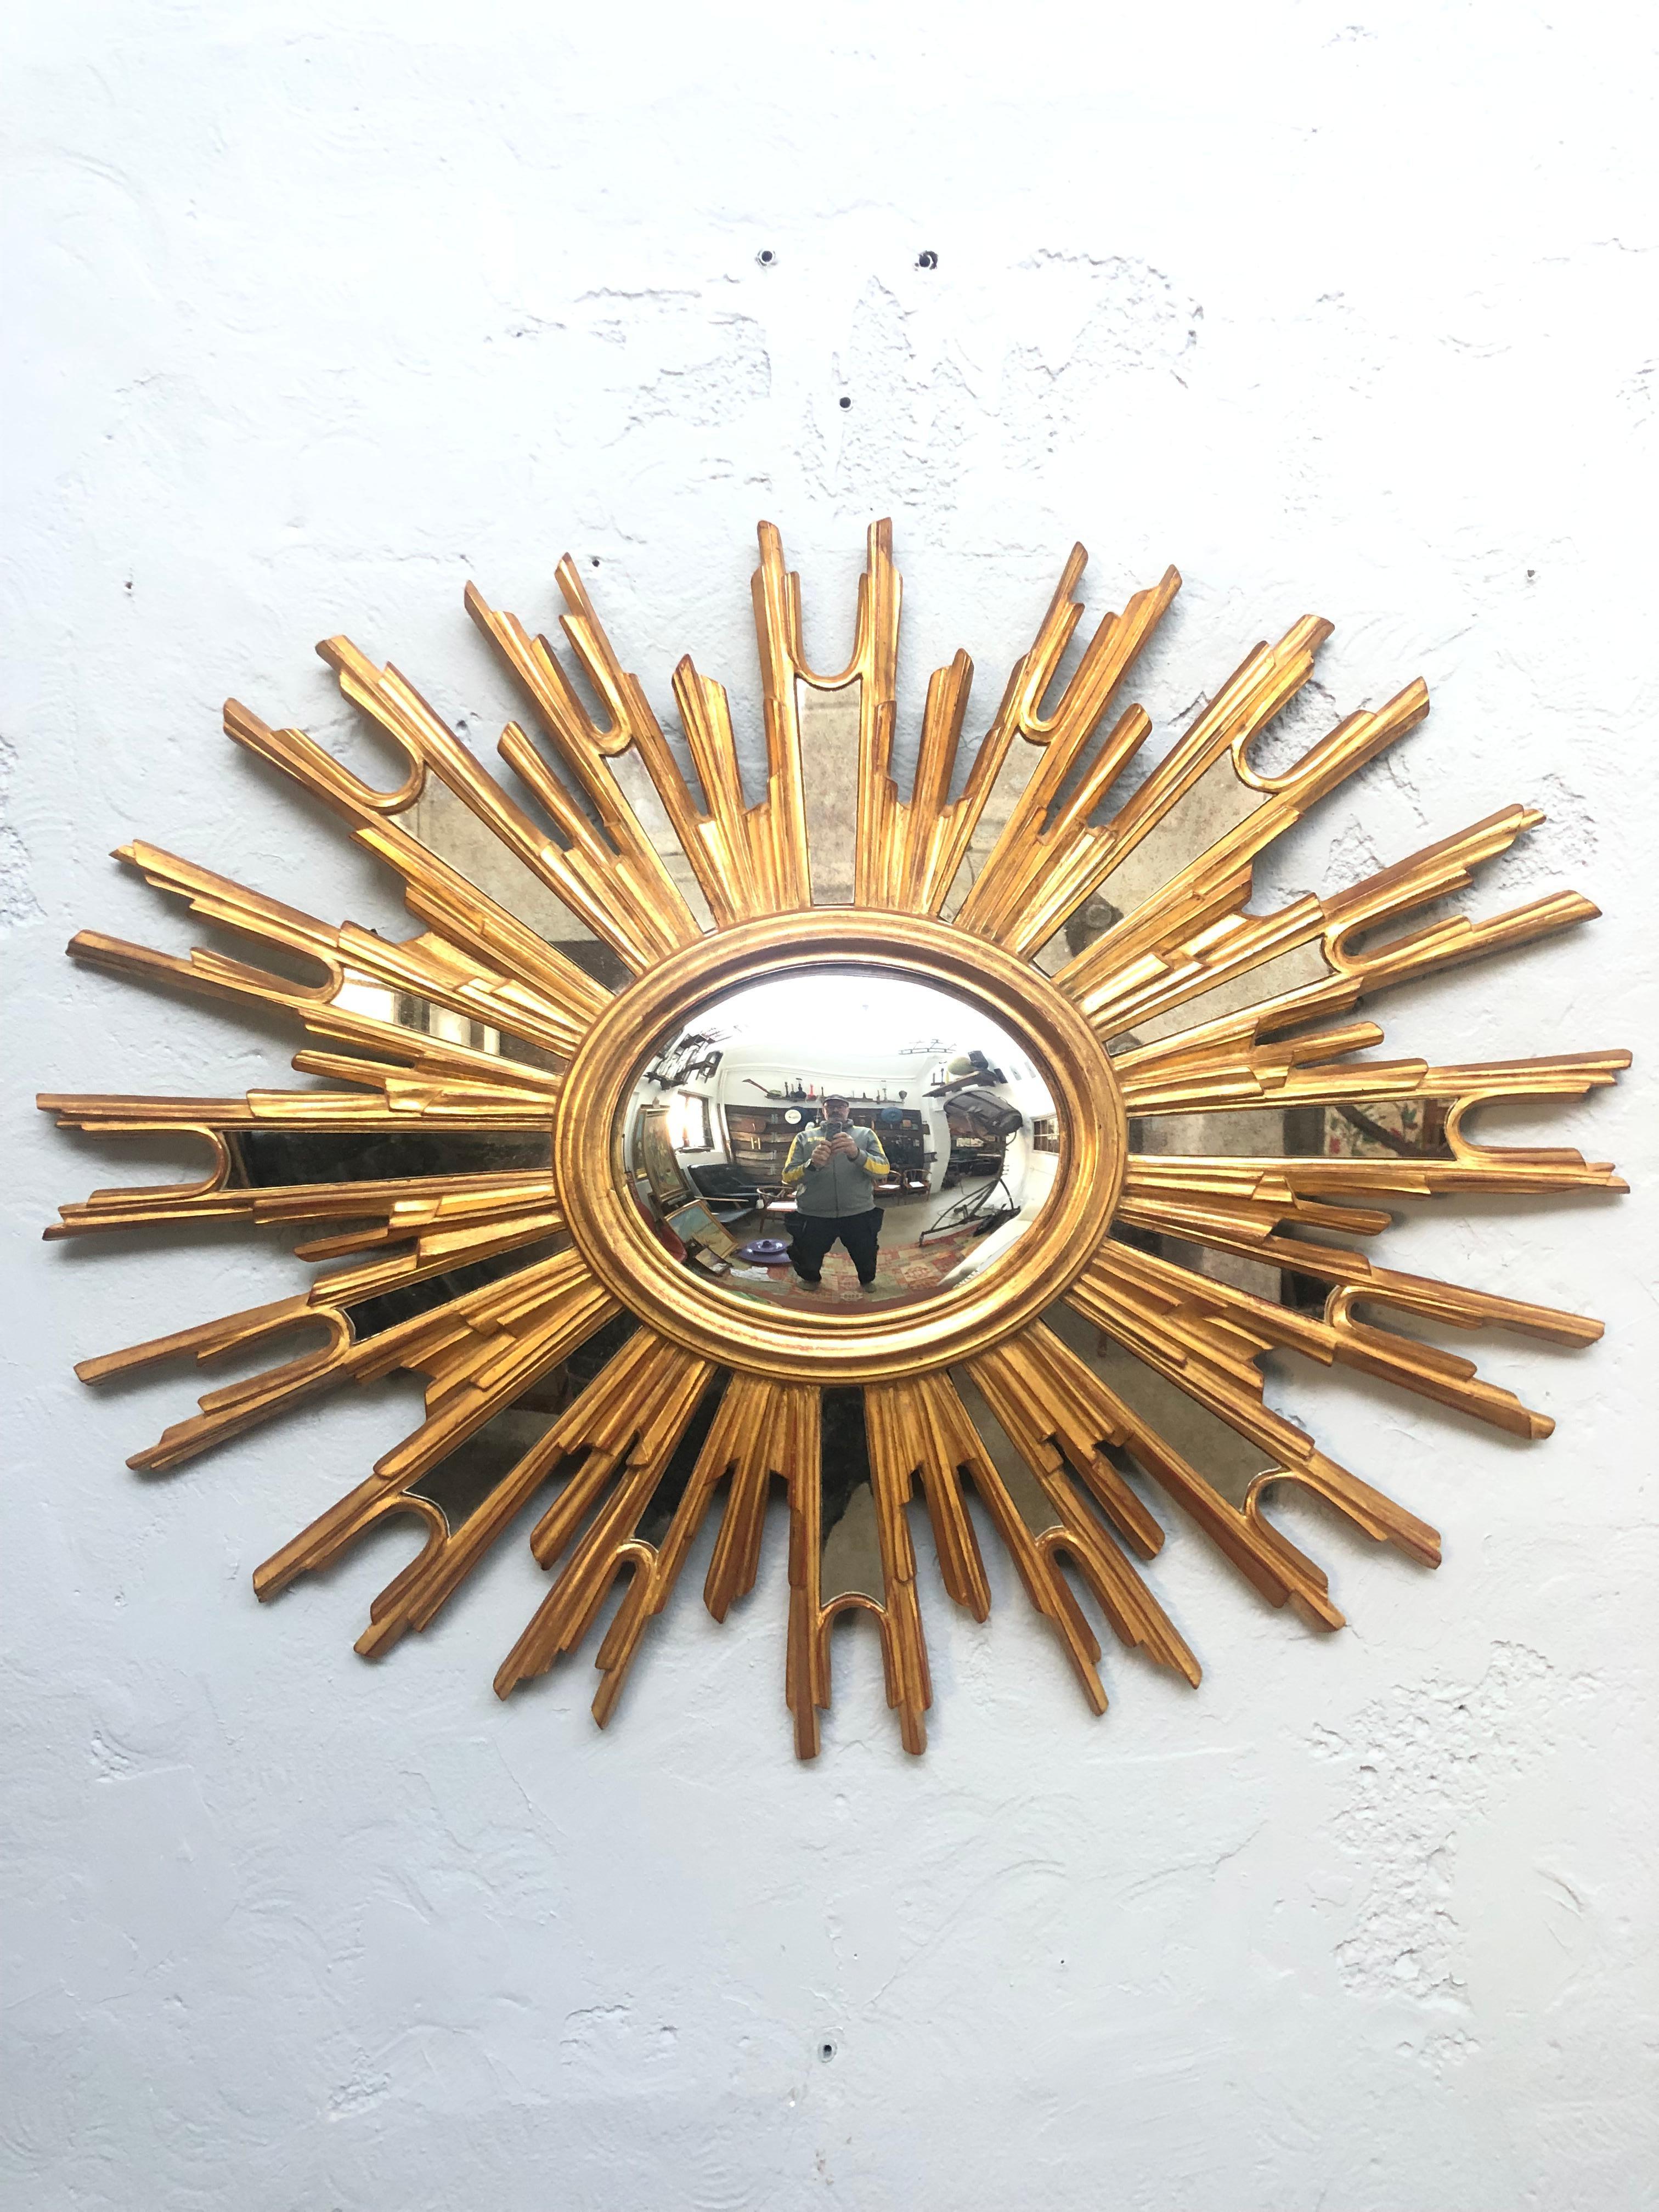 A large sunburst mirror in giltwood by Ateliers Armand Dutry of Belgium and suppliers to the Royal Court. 
In great vintage condition with only slight signs of age related wear. 
Some fading to the makers mark on the reverse side. 
16 pieces of